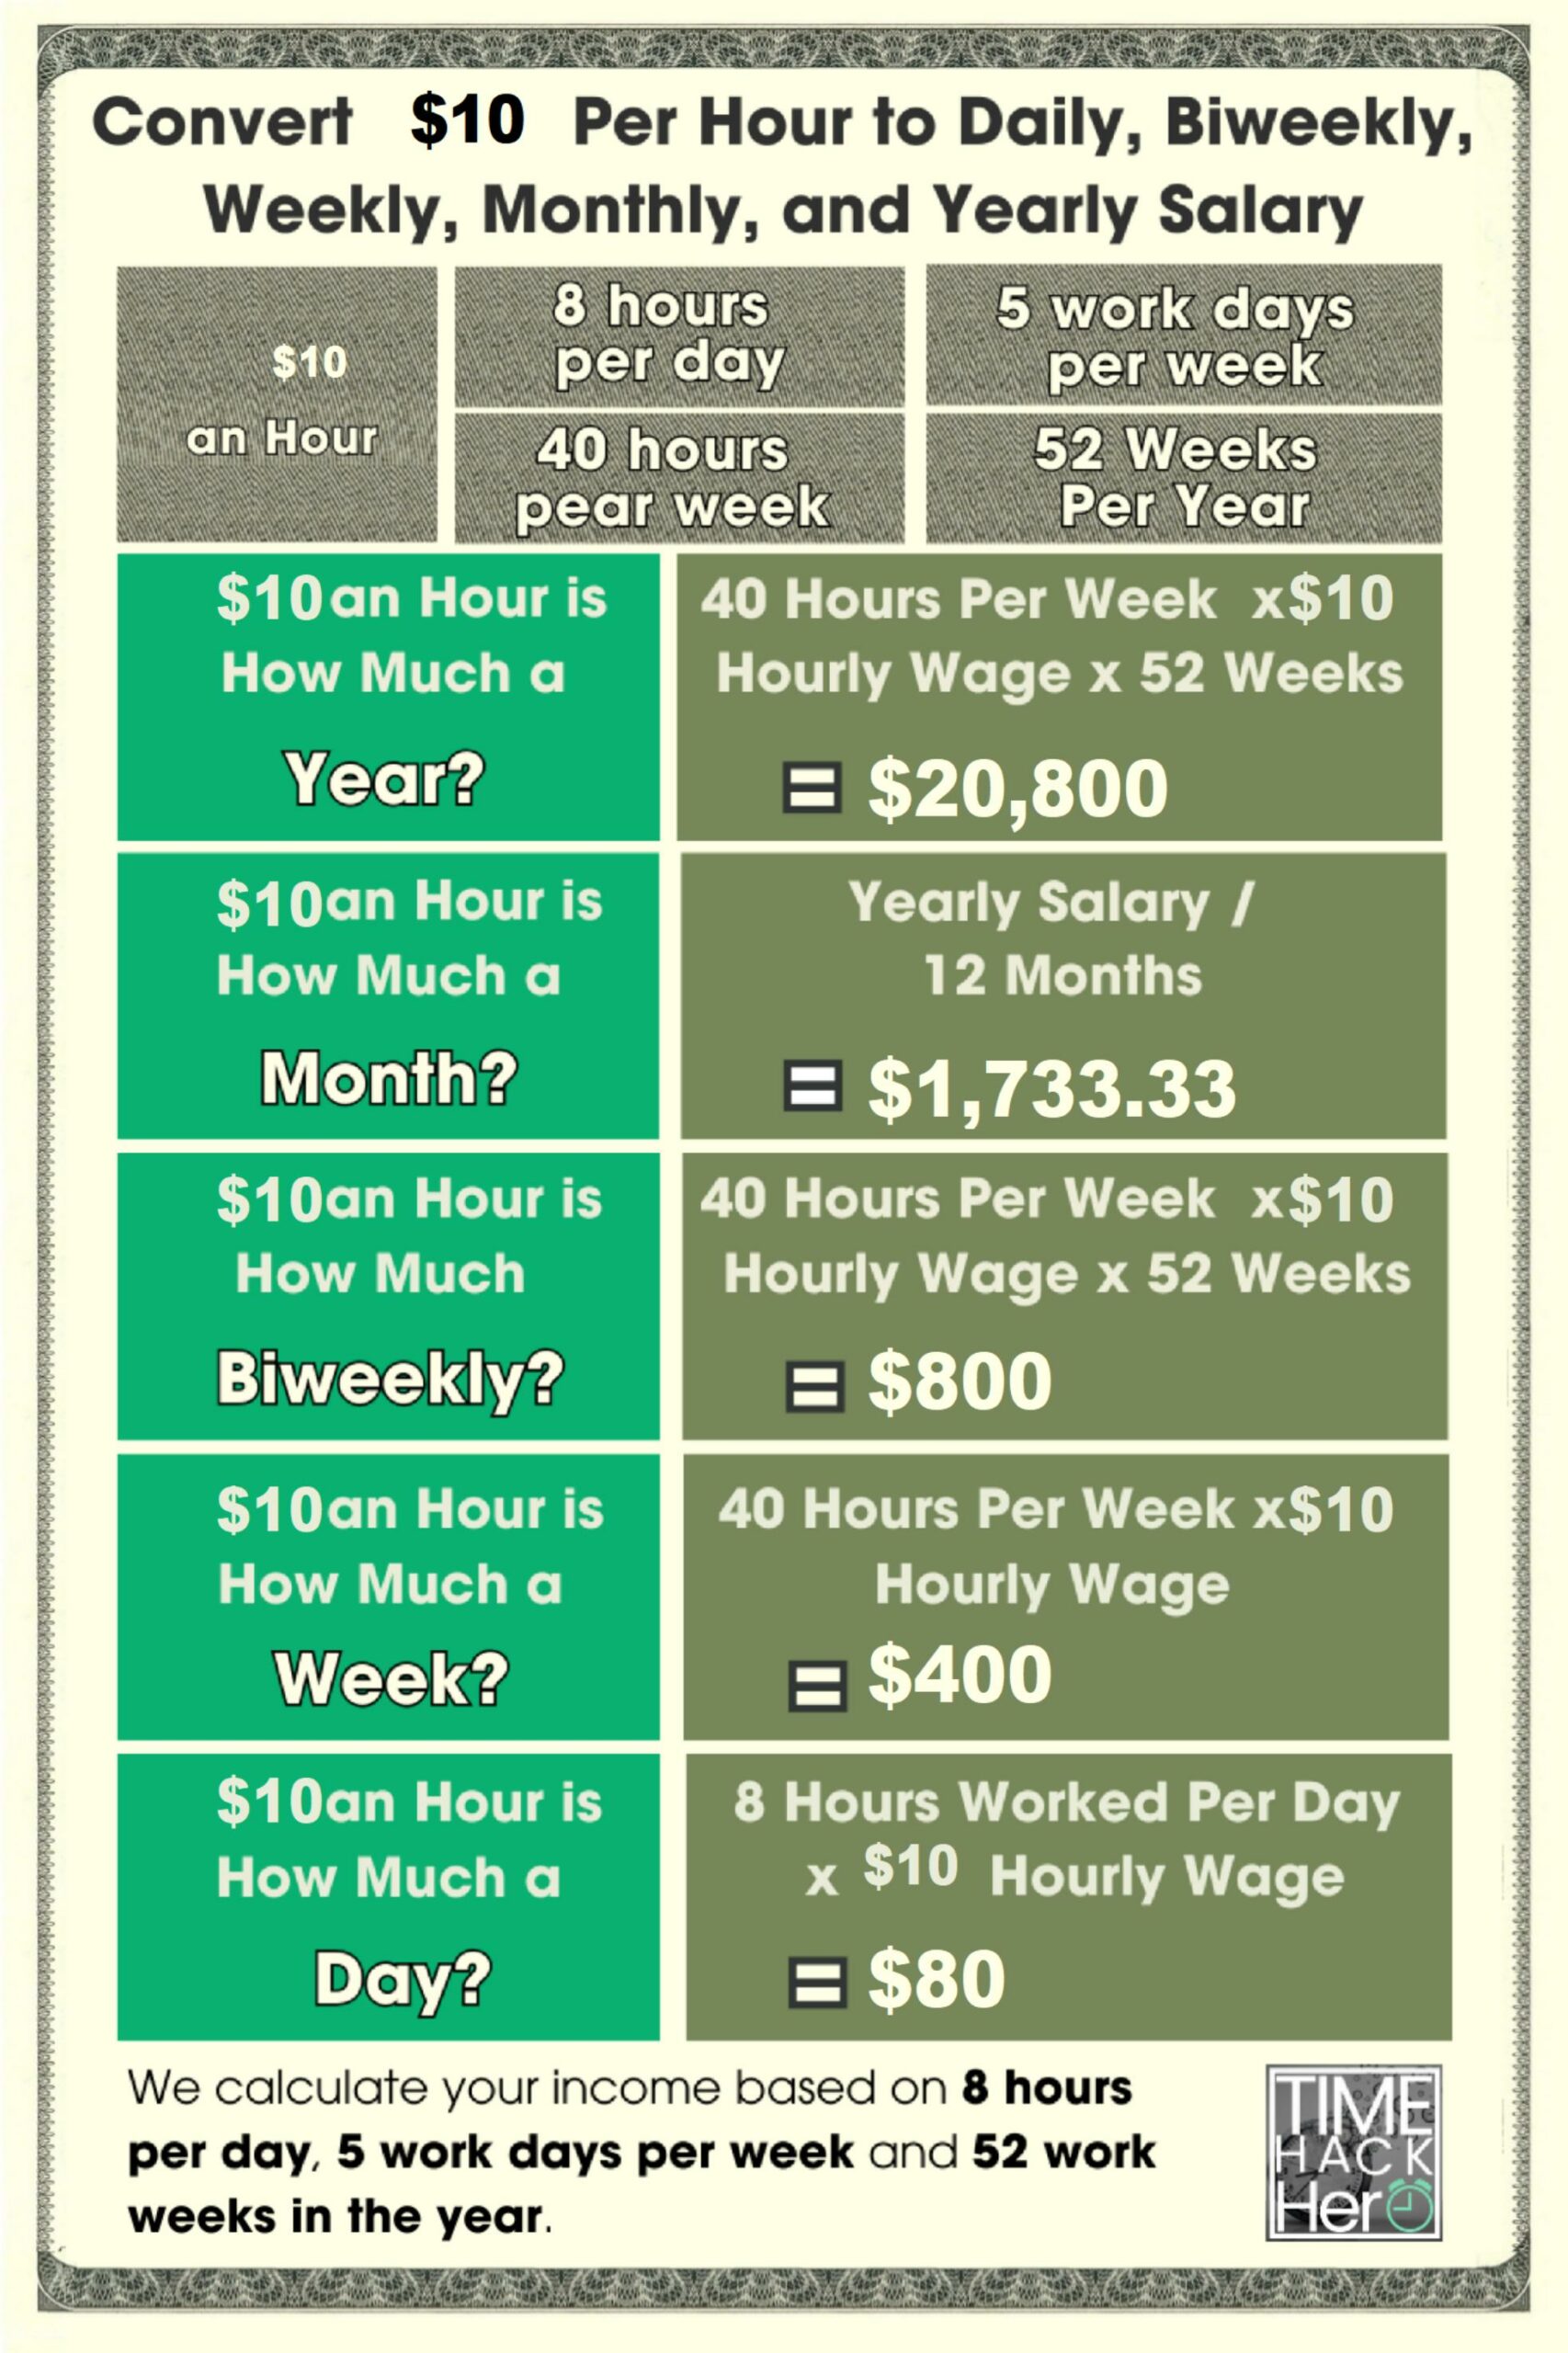 Convert $10 Per Hour to Weekly, Monthly, and Yearly Salary